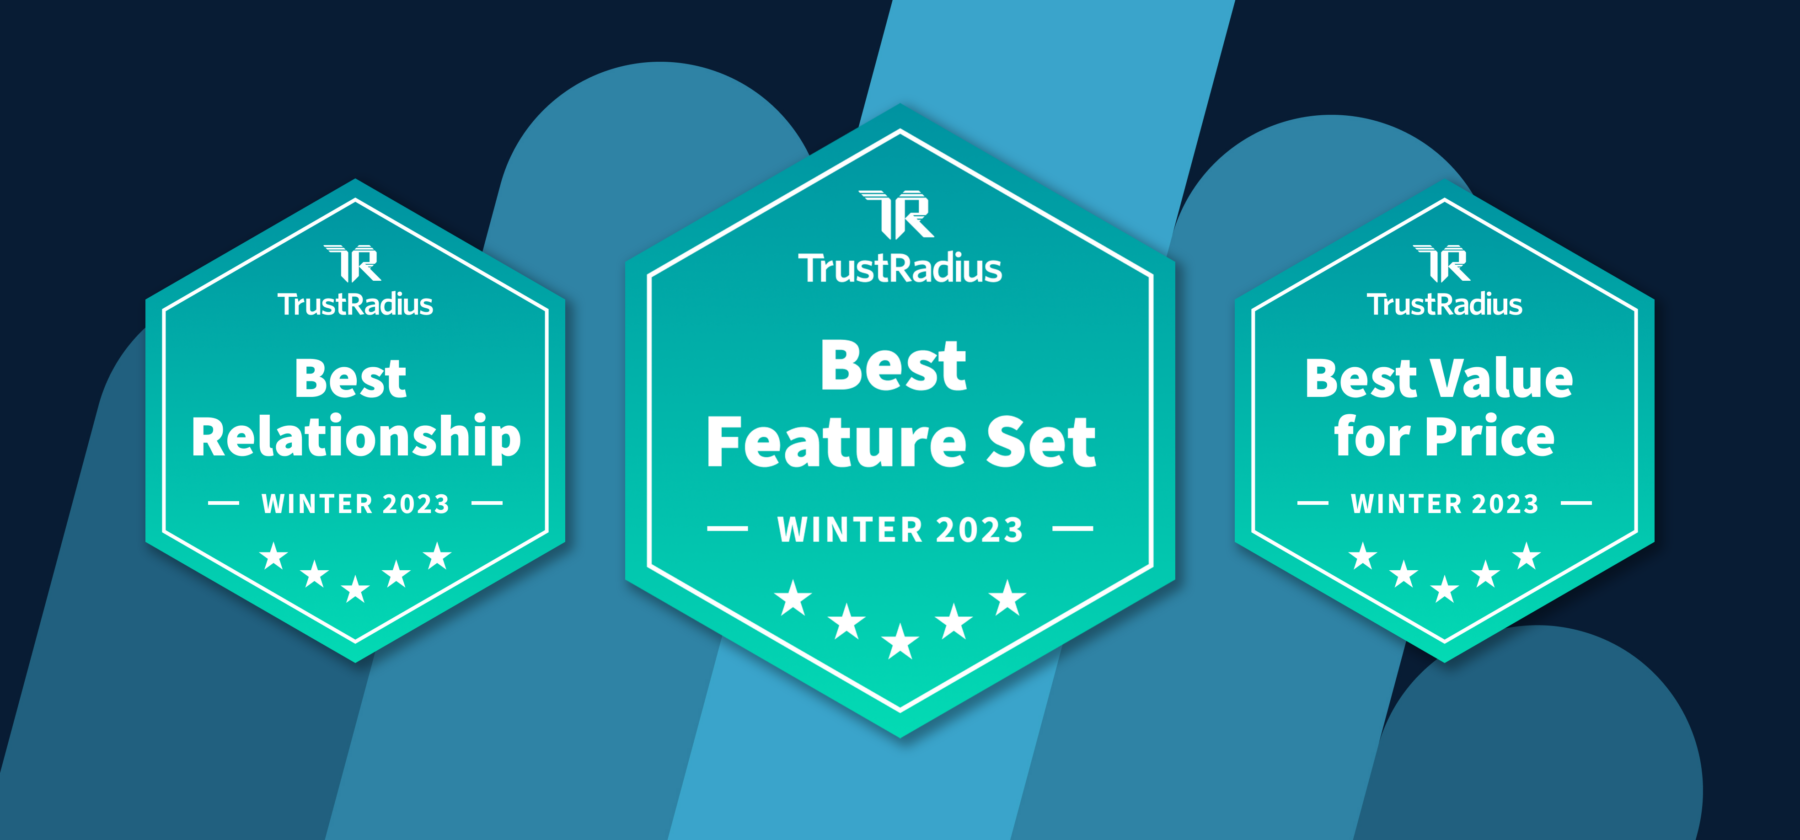 TrustRadius "Best of" awards hero image: "Best relationship," "Best Feature Set," and "Best Value for Price" badges